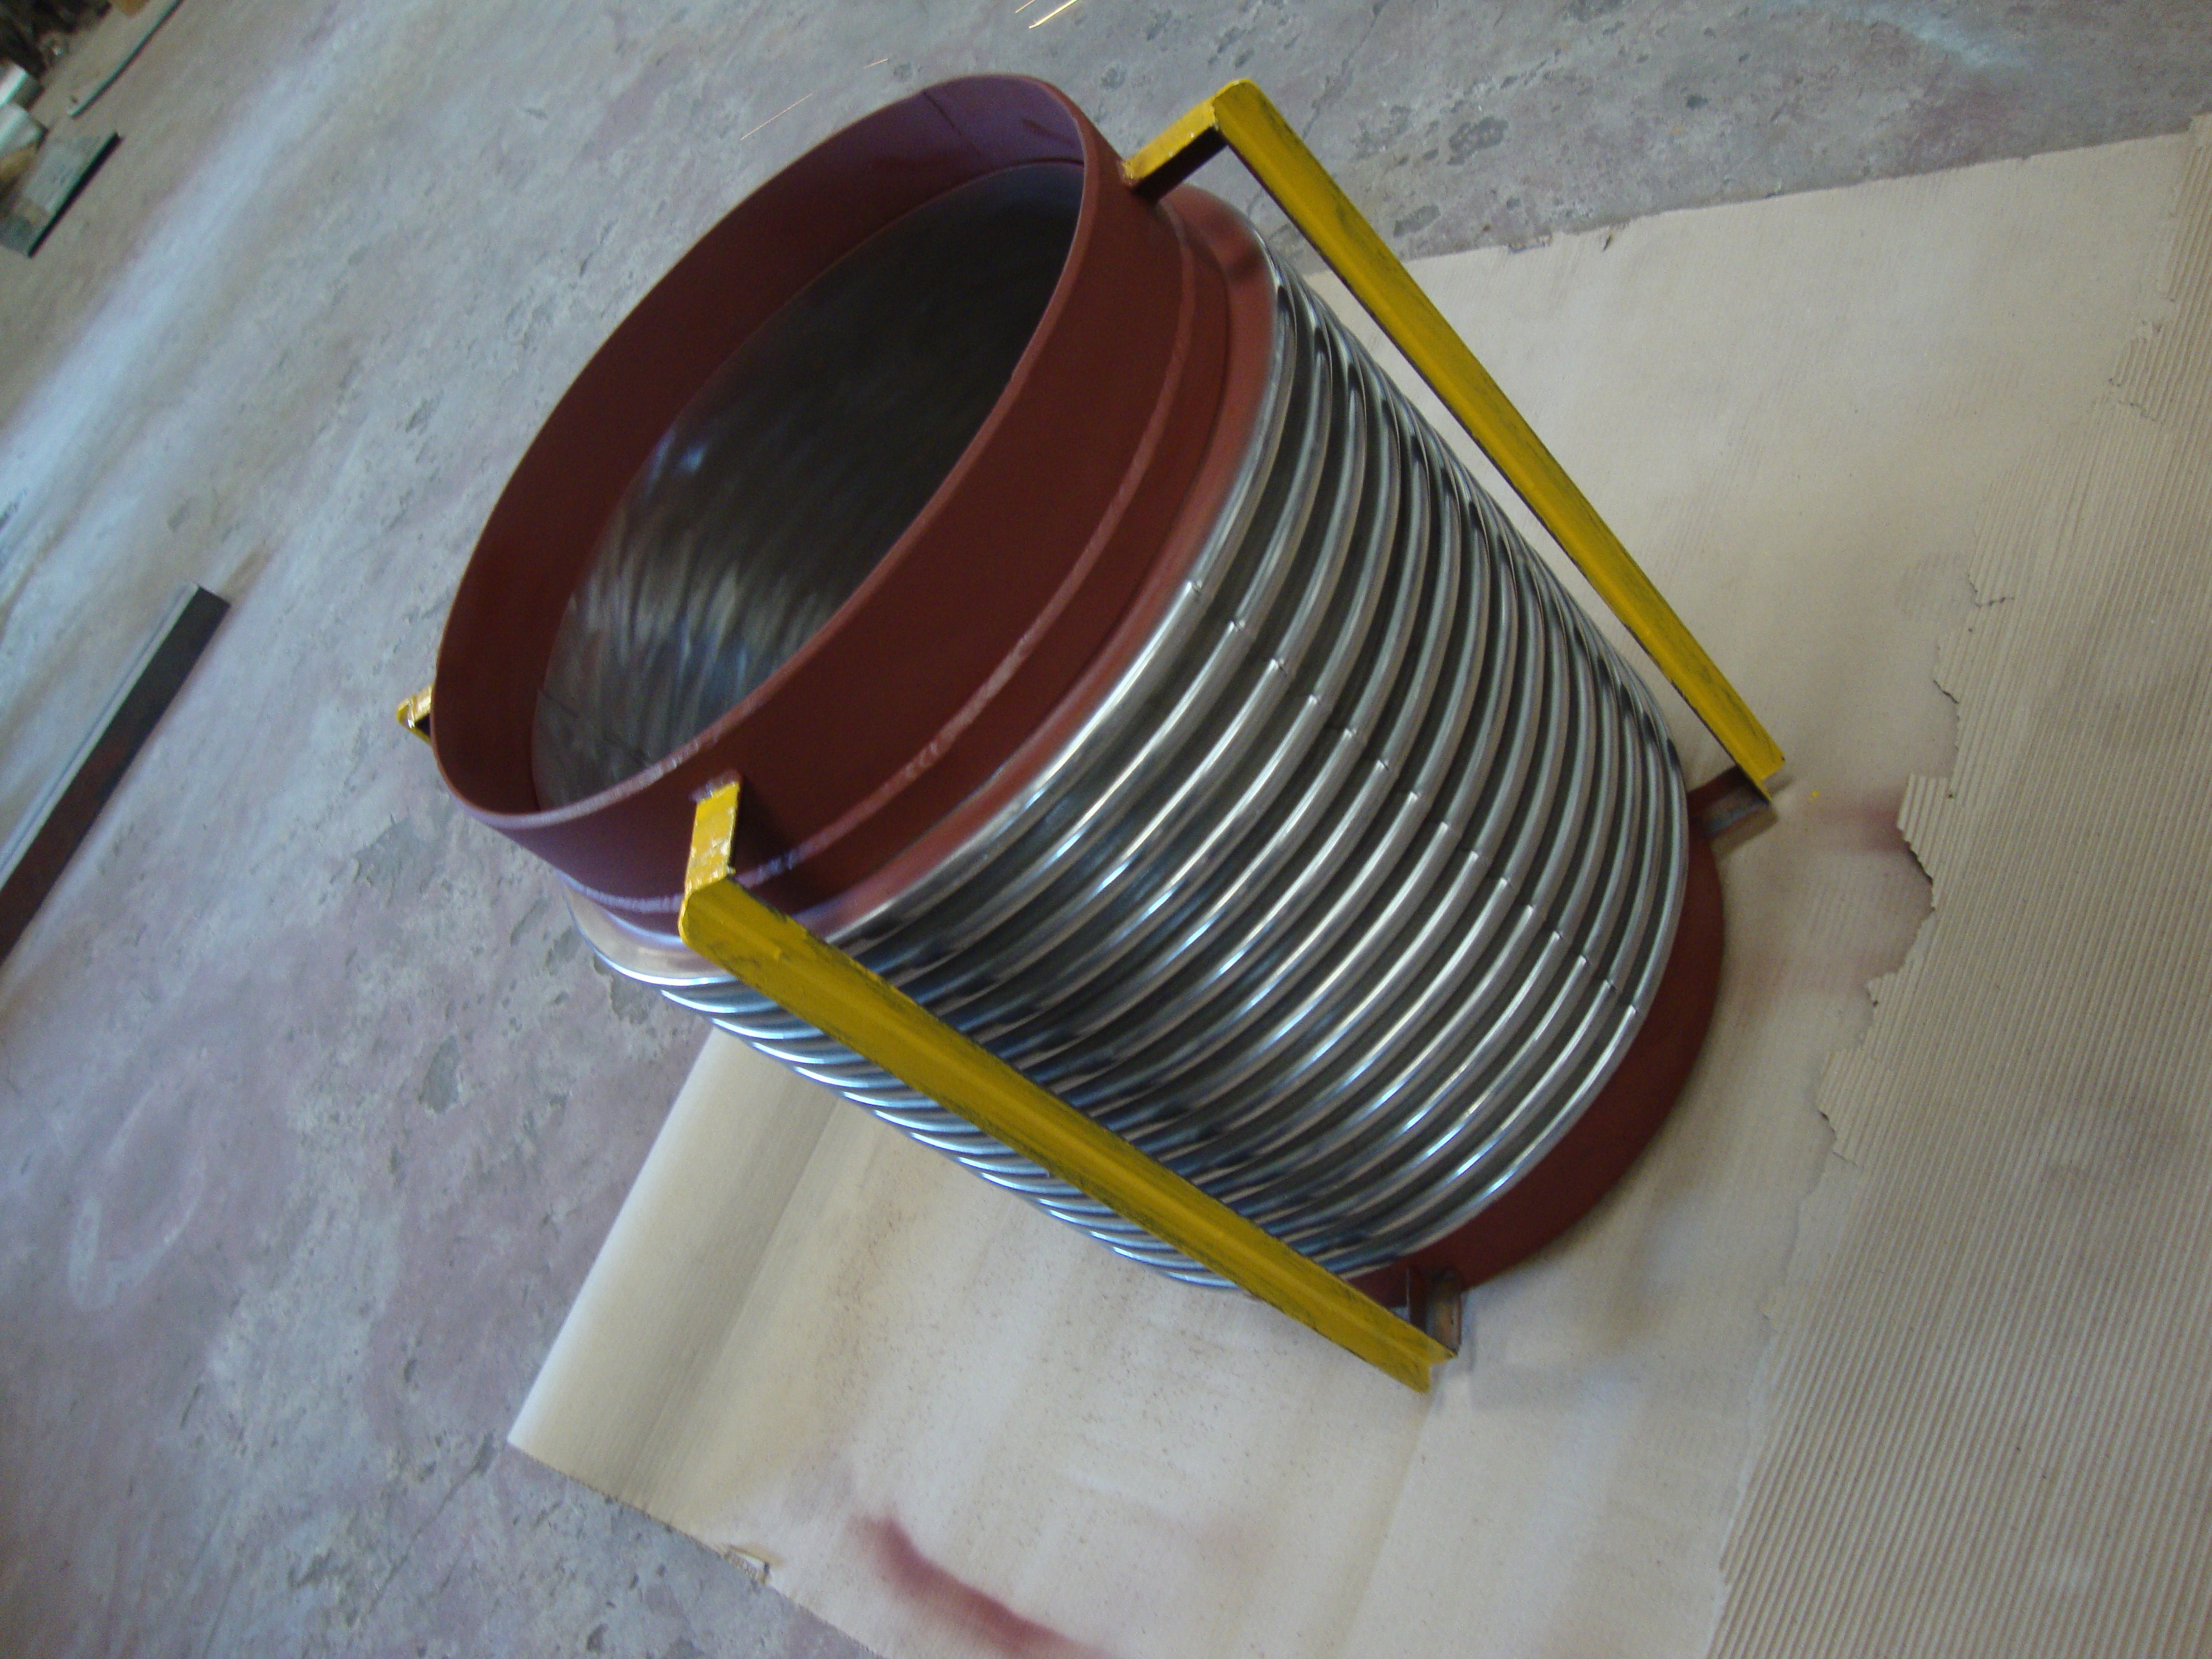 Expansion Joint